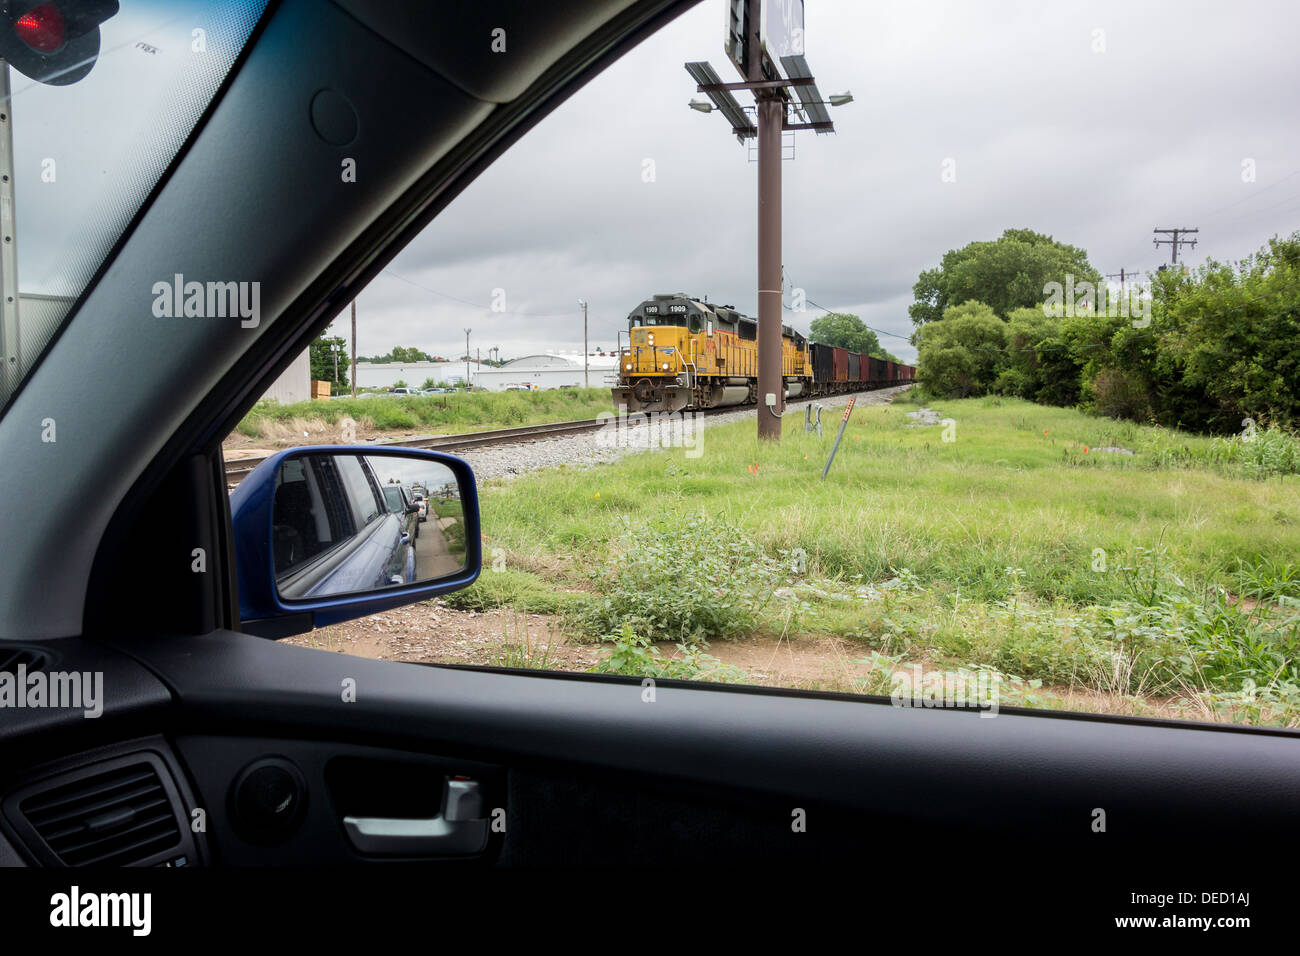 From inside an automobile, an approaching freight train is viewed through the window. Stock Photo